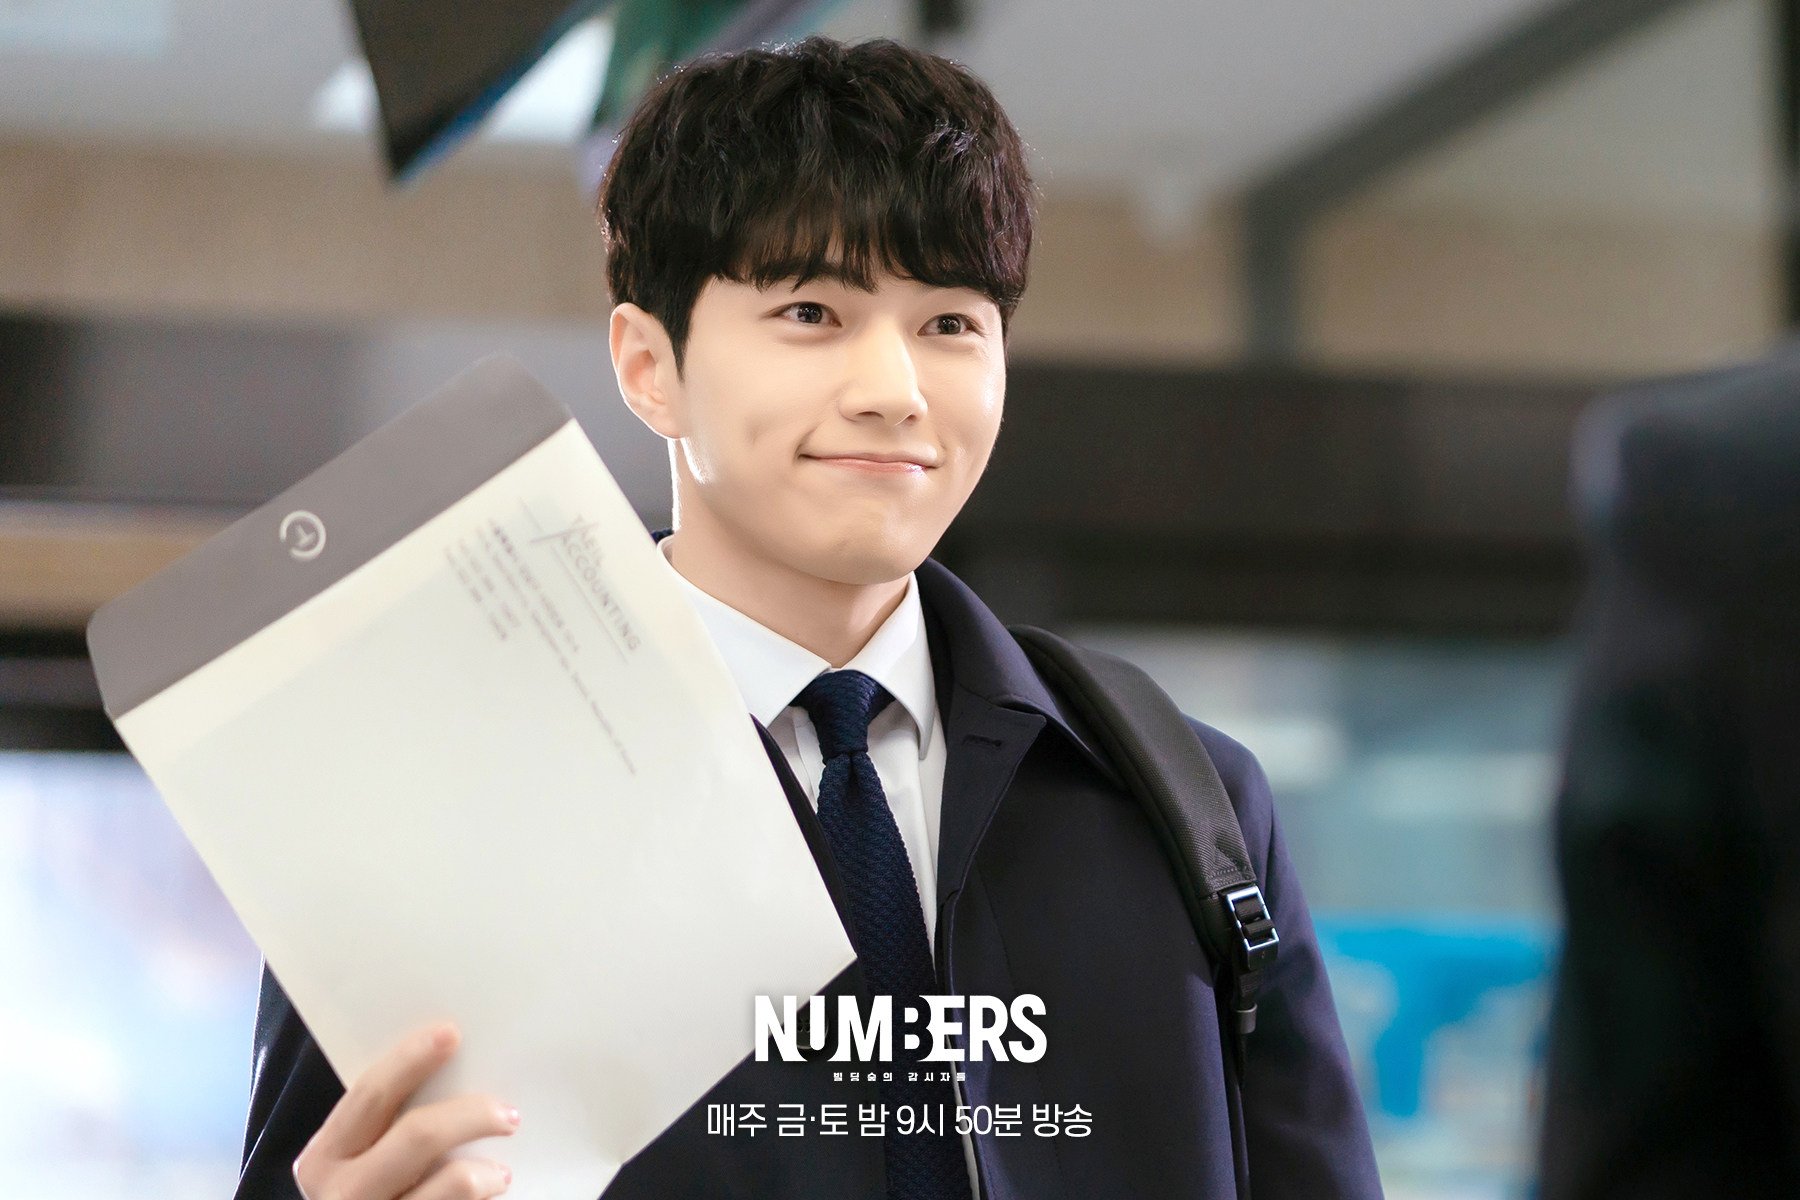 Kim Myung-soo as Ho-woo in a still from “Numbers”.